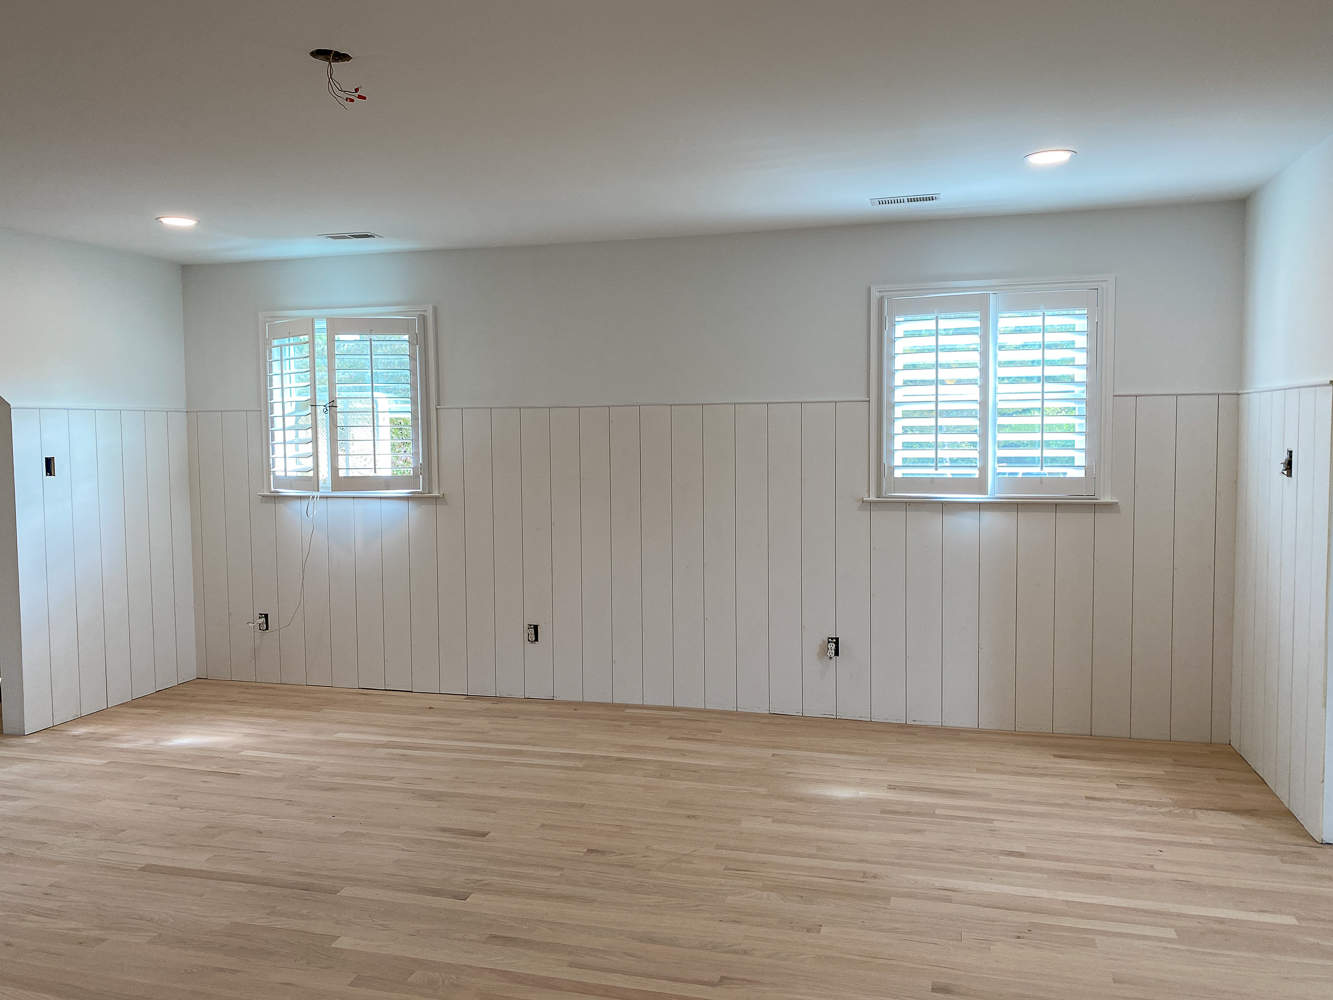 unfinished room with raw red oak floors, unstained